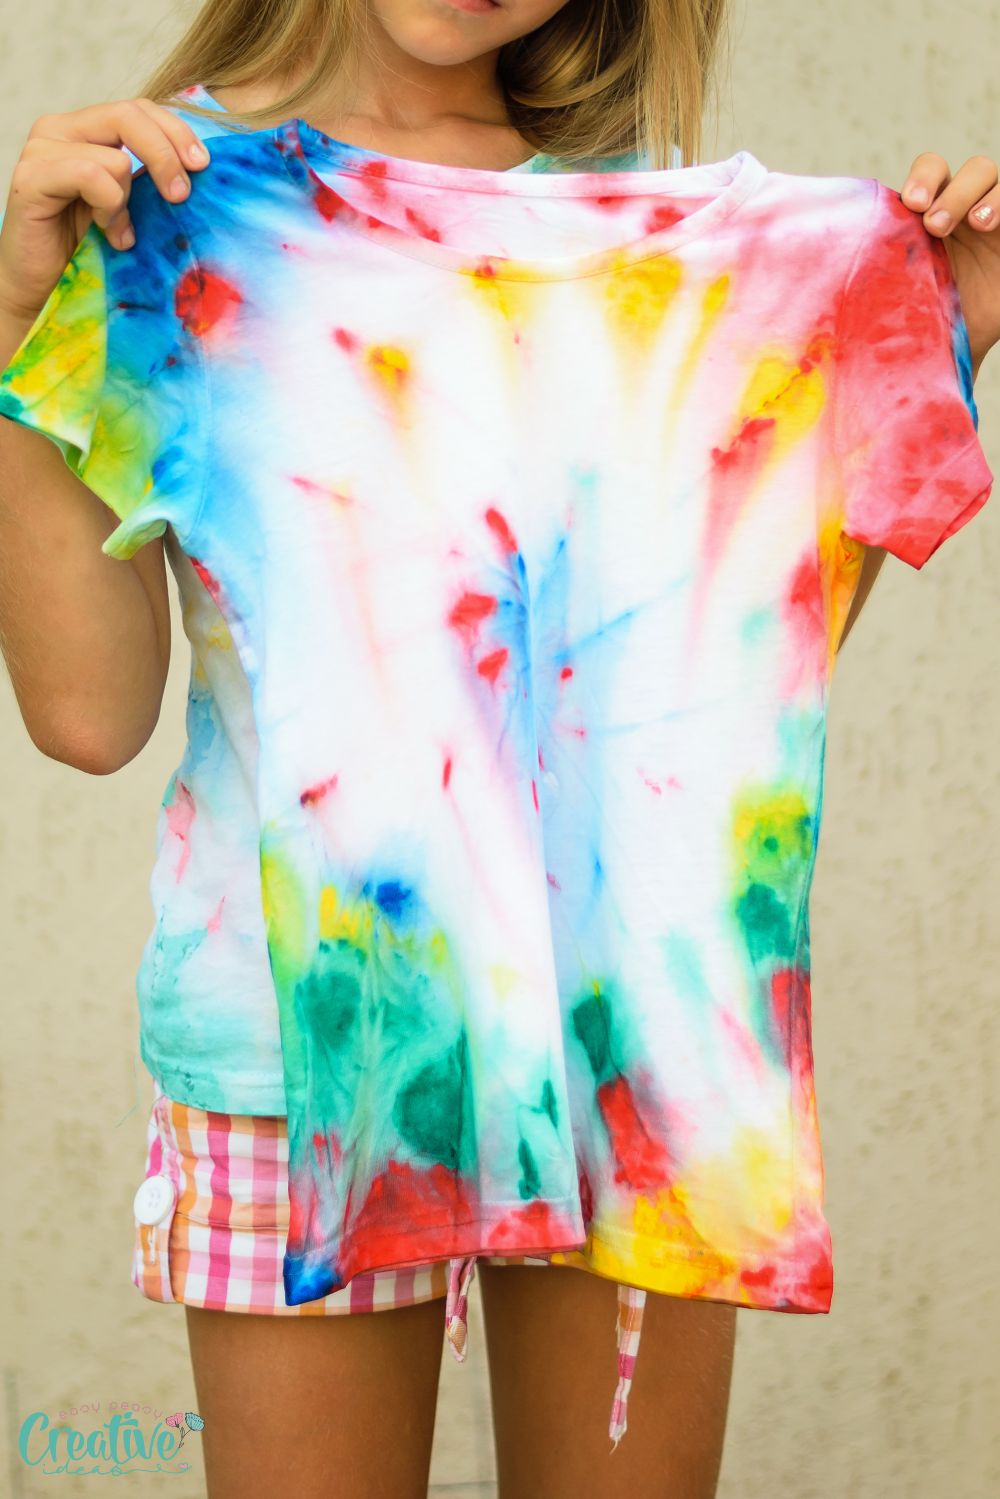 Tie dyeing technique on a t-shirt